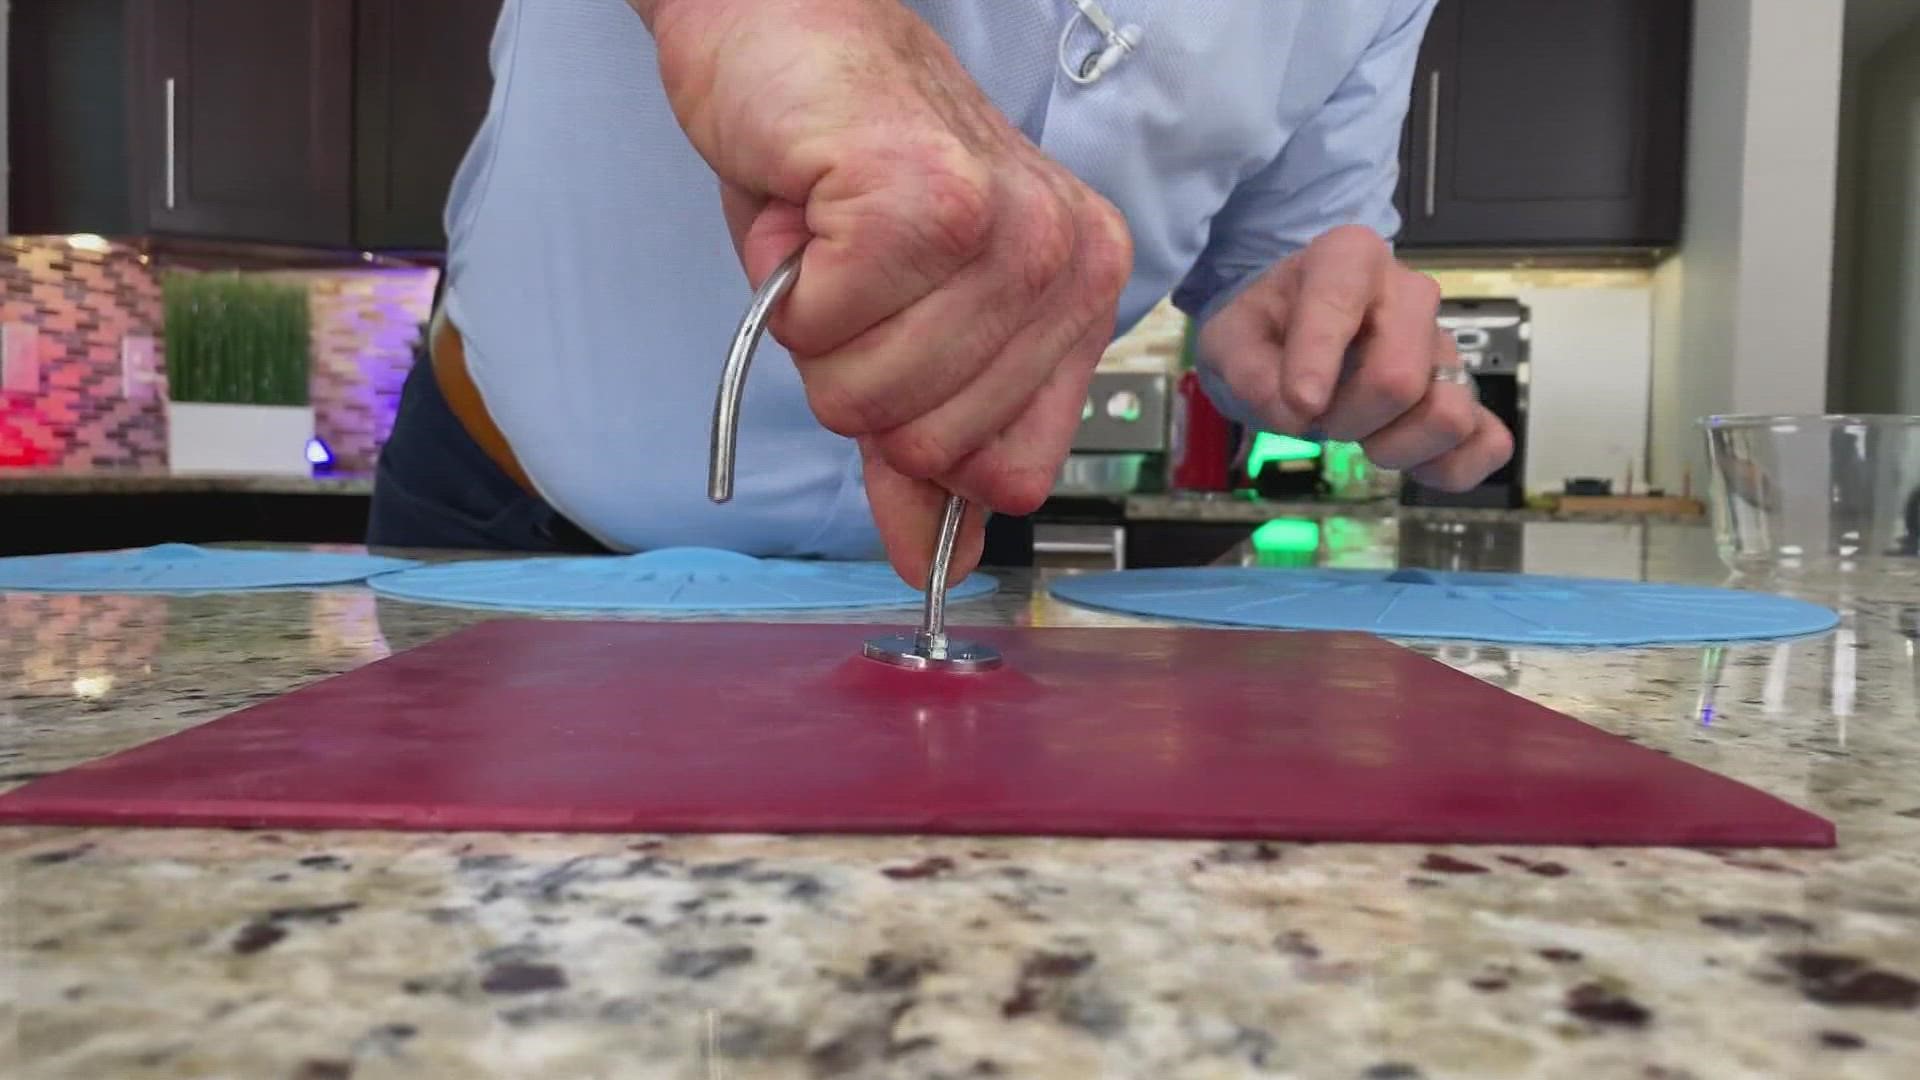 Science guy Steve Spangler puts the power of air pressure to the test in today's Science Minute.